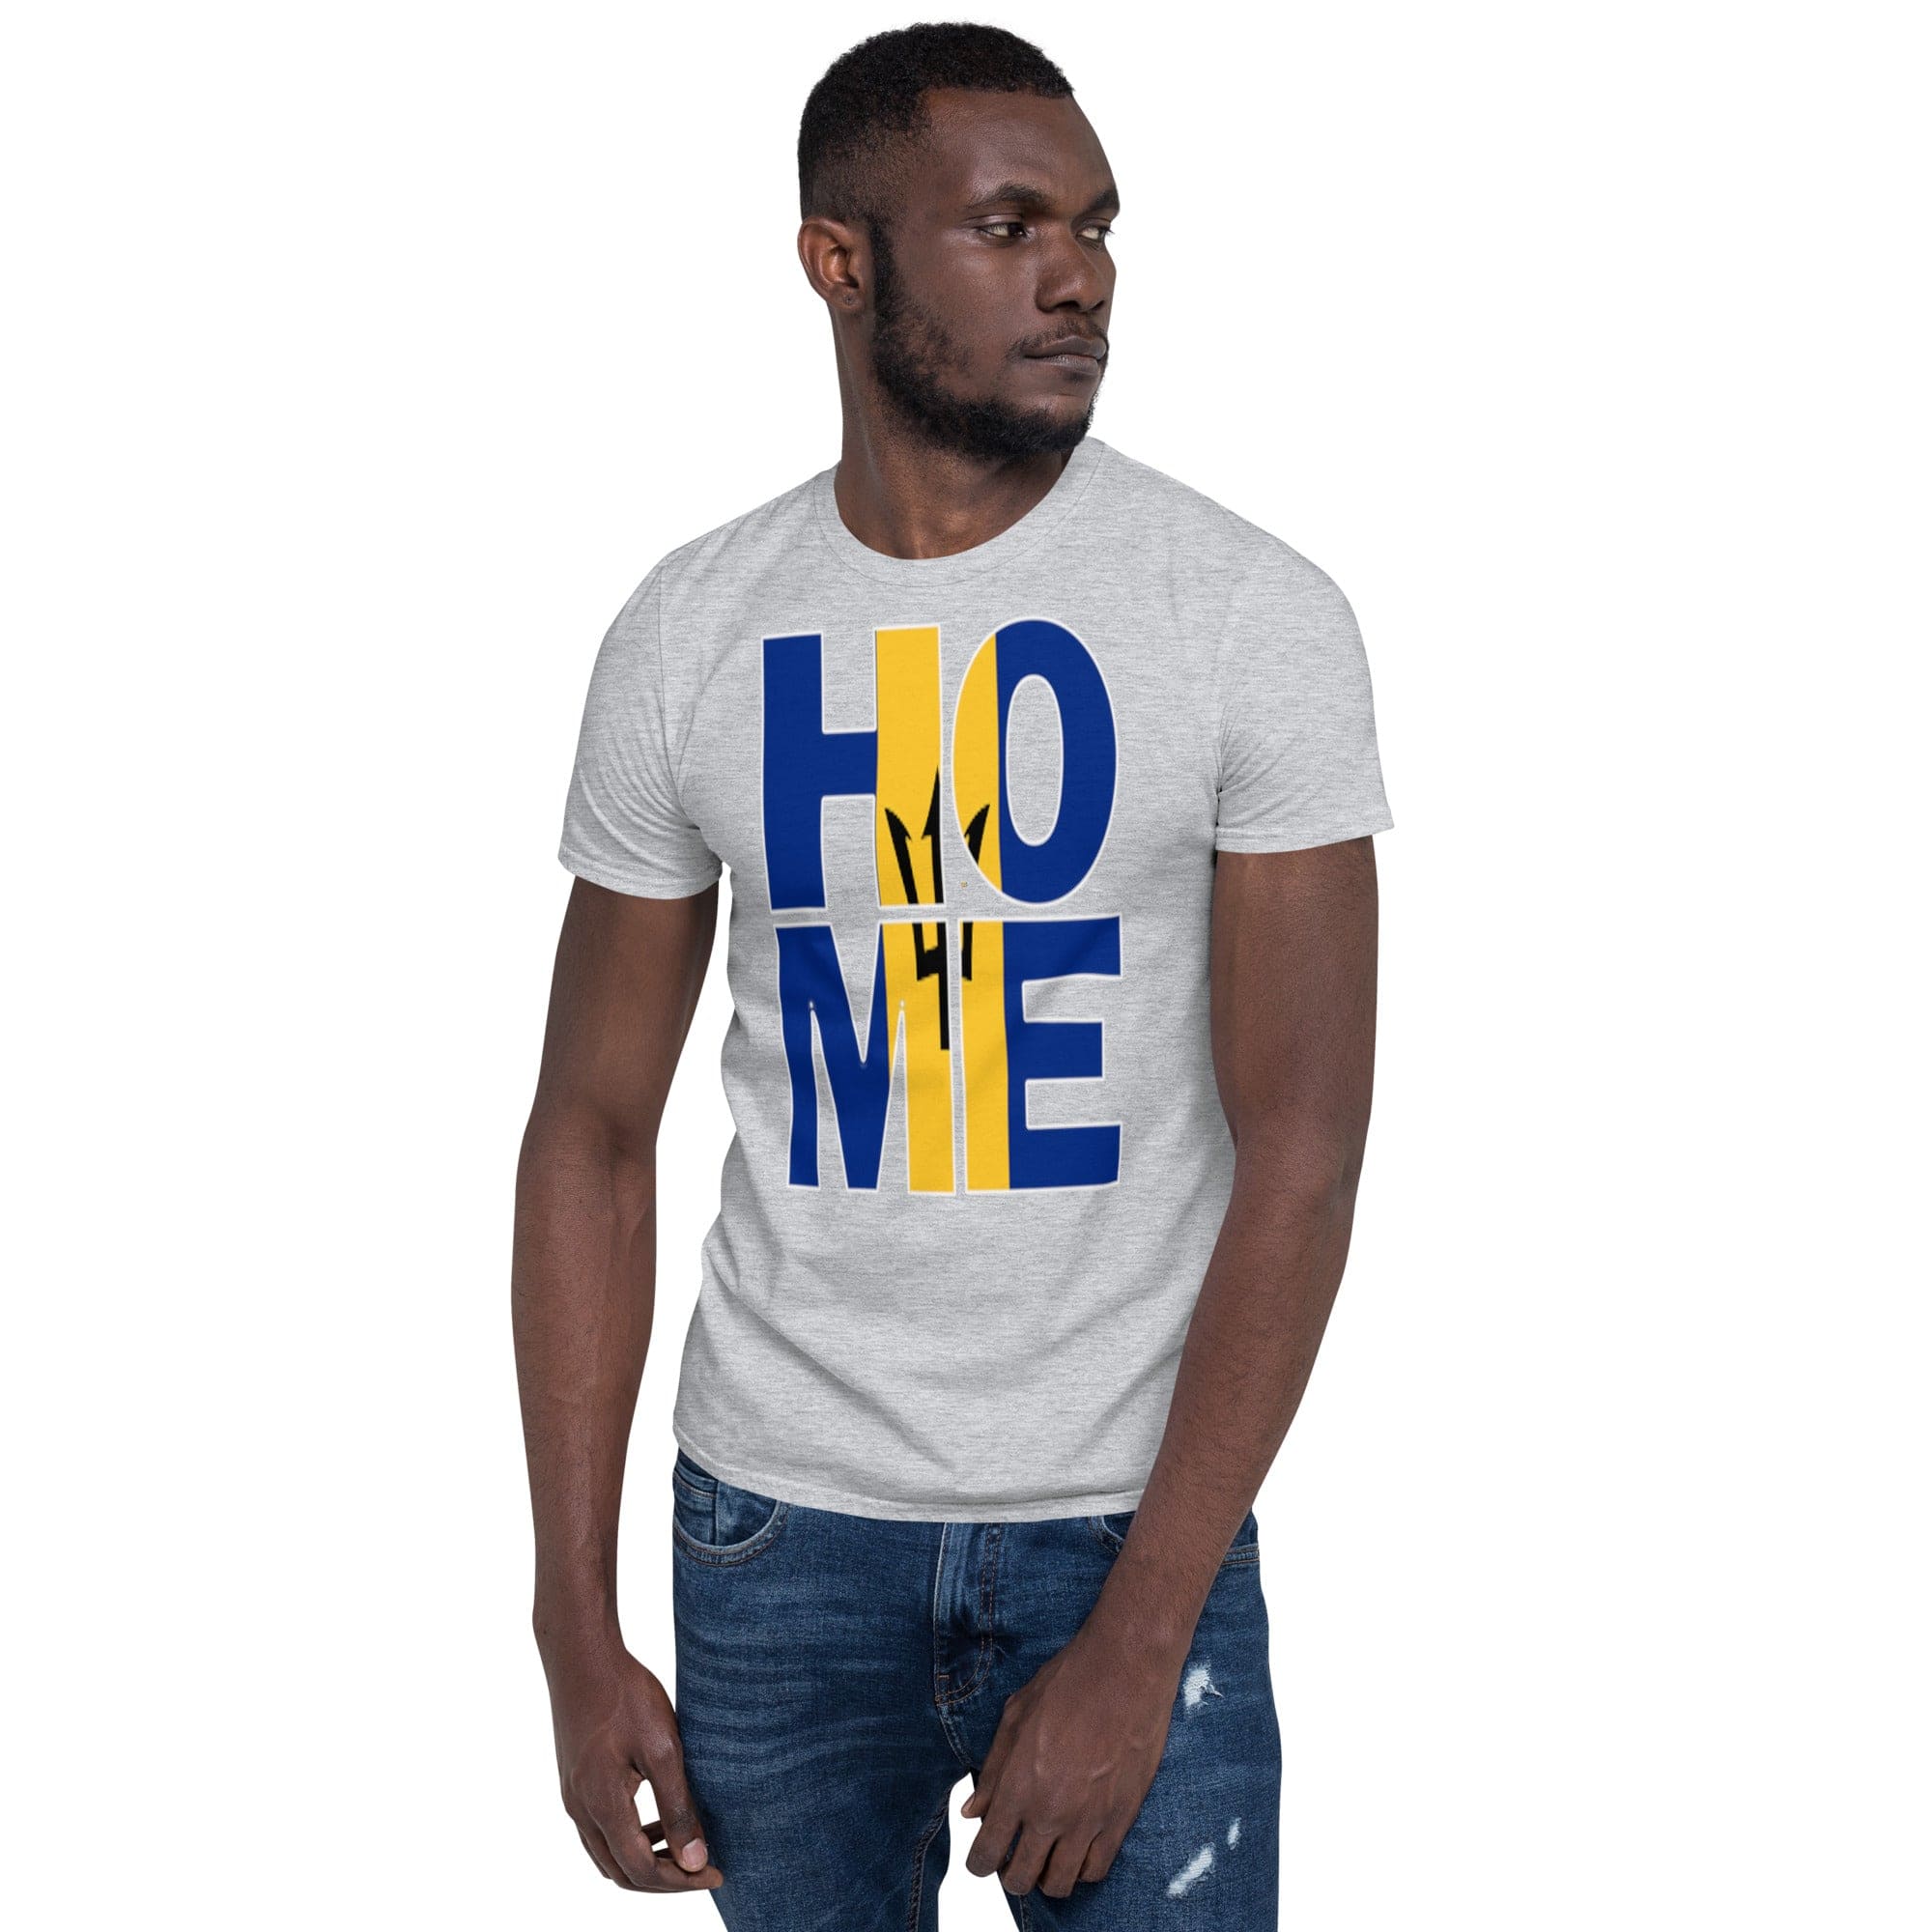 Barbados flag design in the words HOME on a sport grey color shirt on the front of a black man.